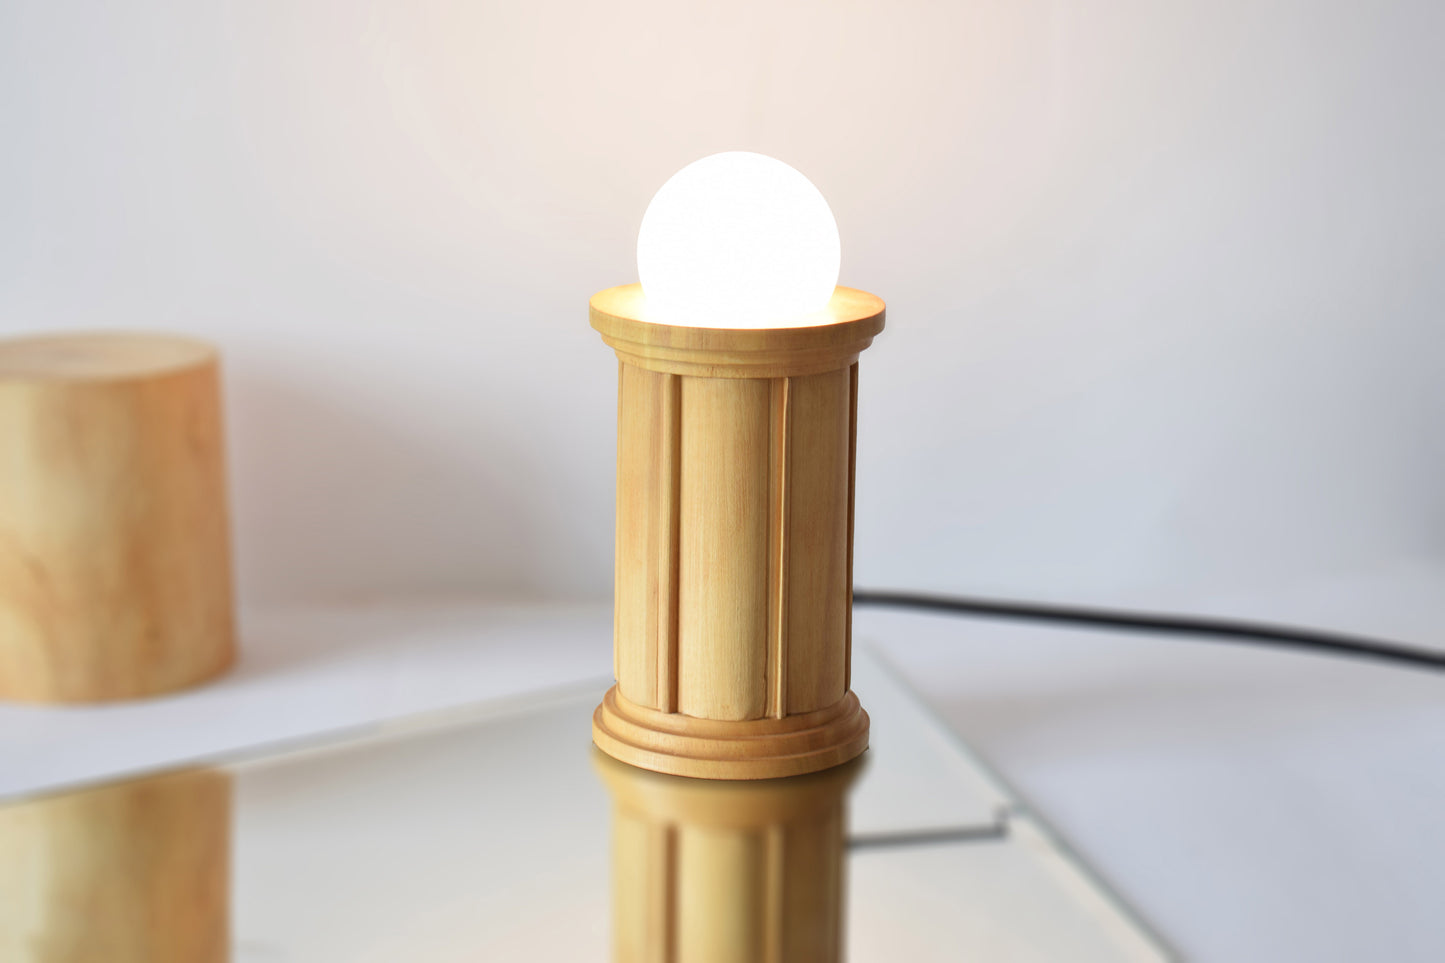 Table lamp with Adjustable lighting 